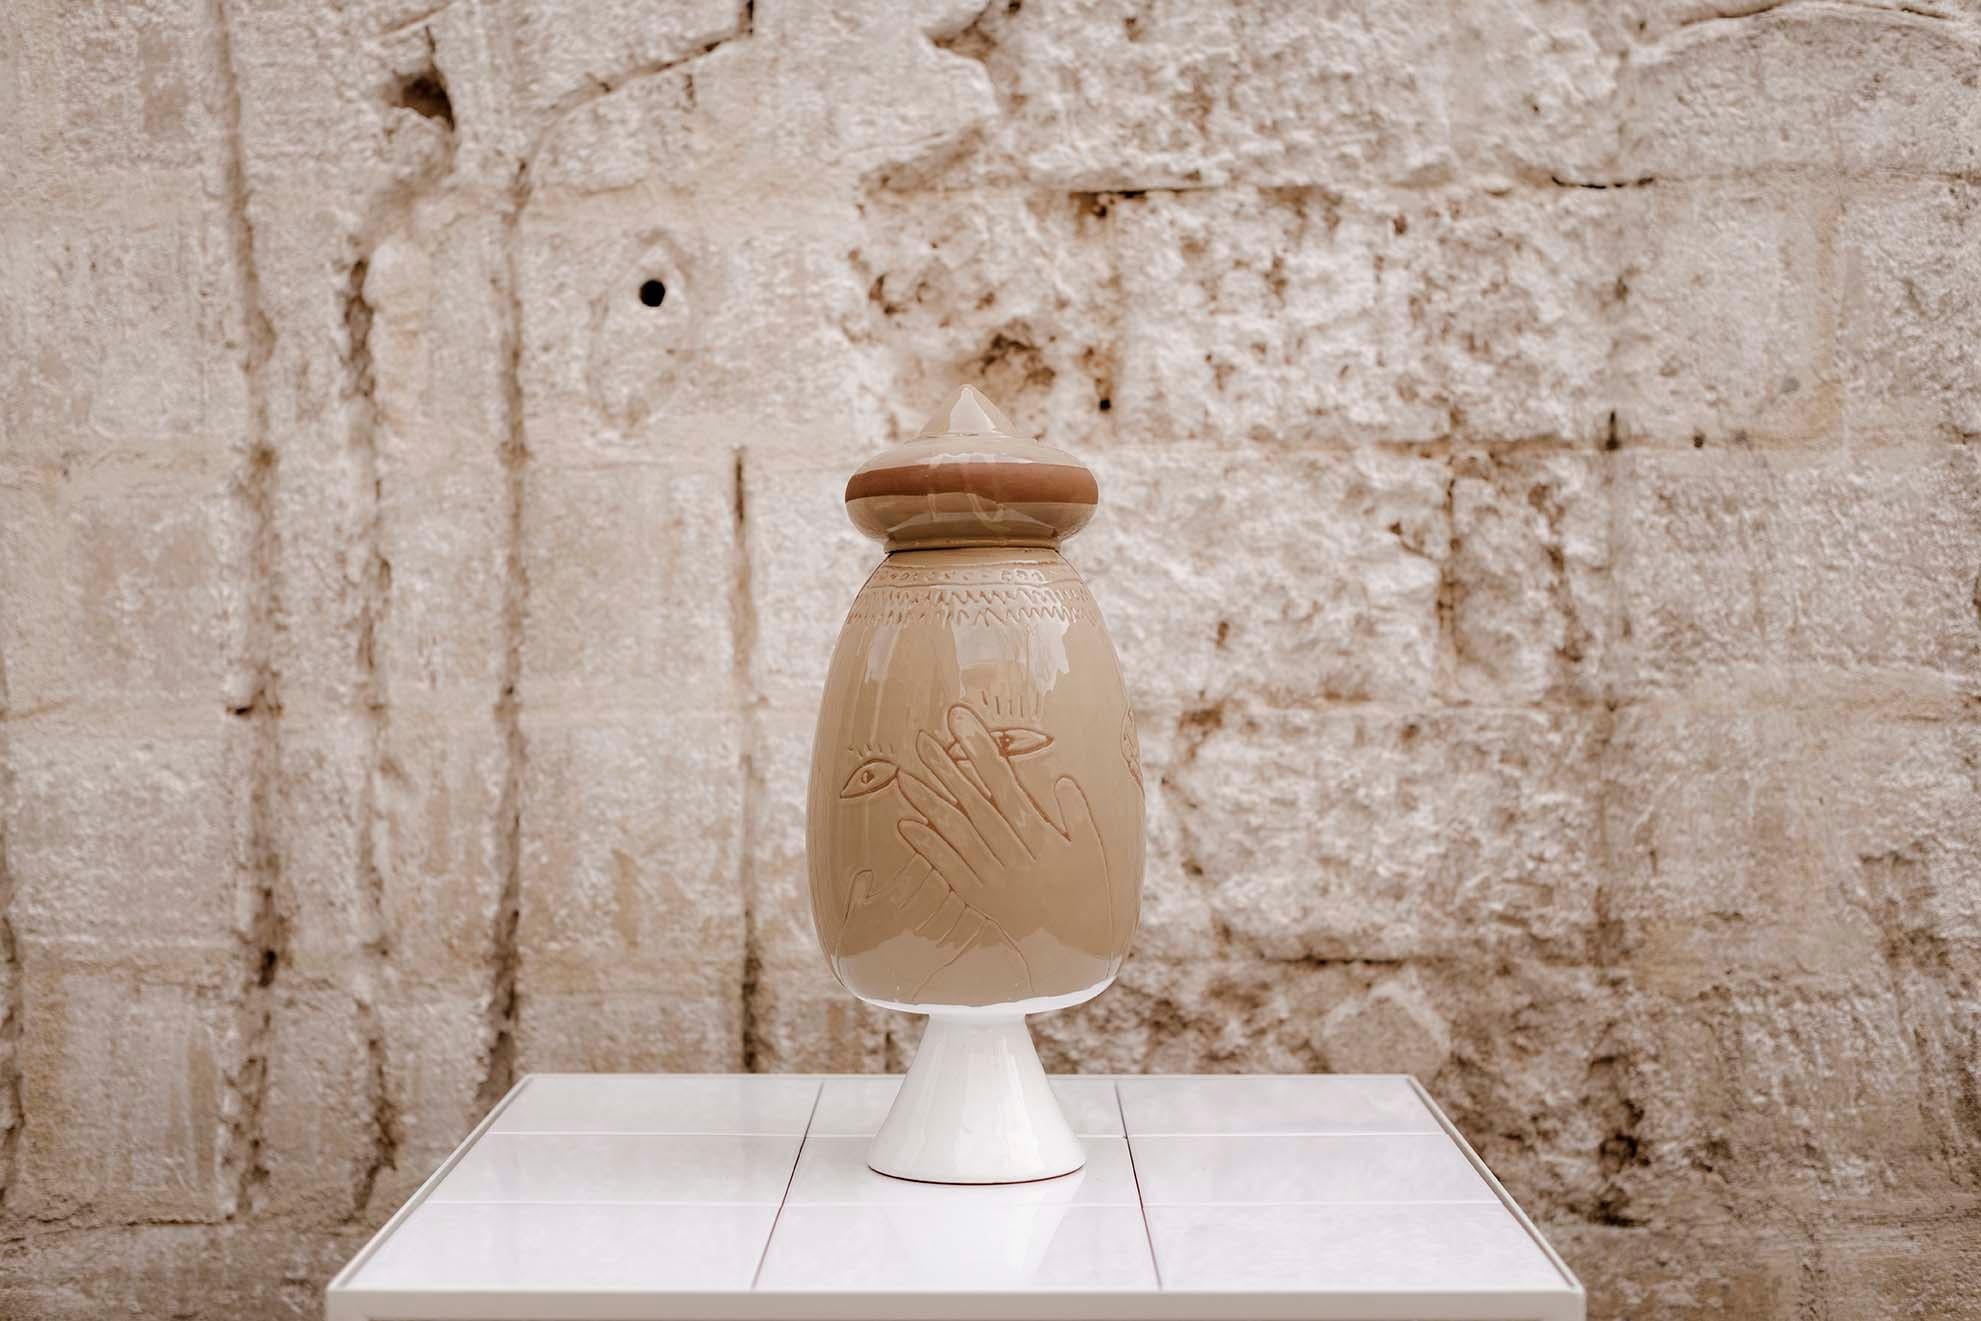 This vase from the Sighe' collection has drawn inspiration from a historic place influenced by the vicinity of a monastery which introduces signs and inspirations and above all a strong sense of the medieval iconography.

The 